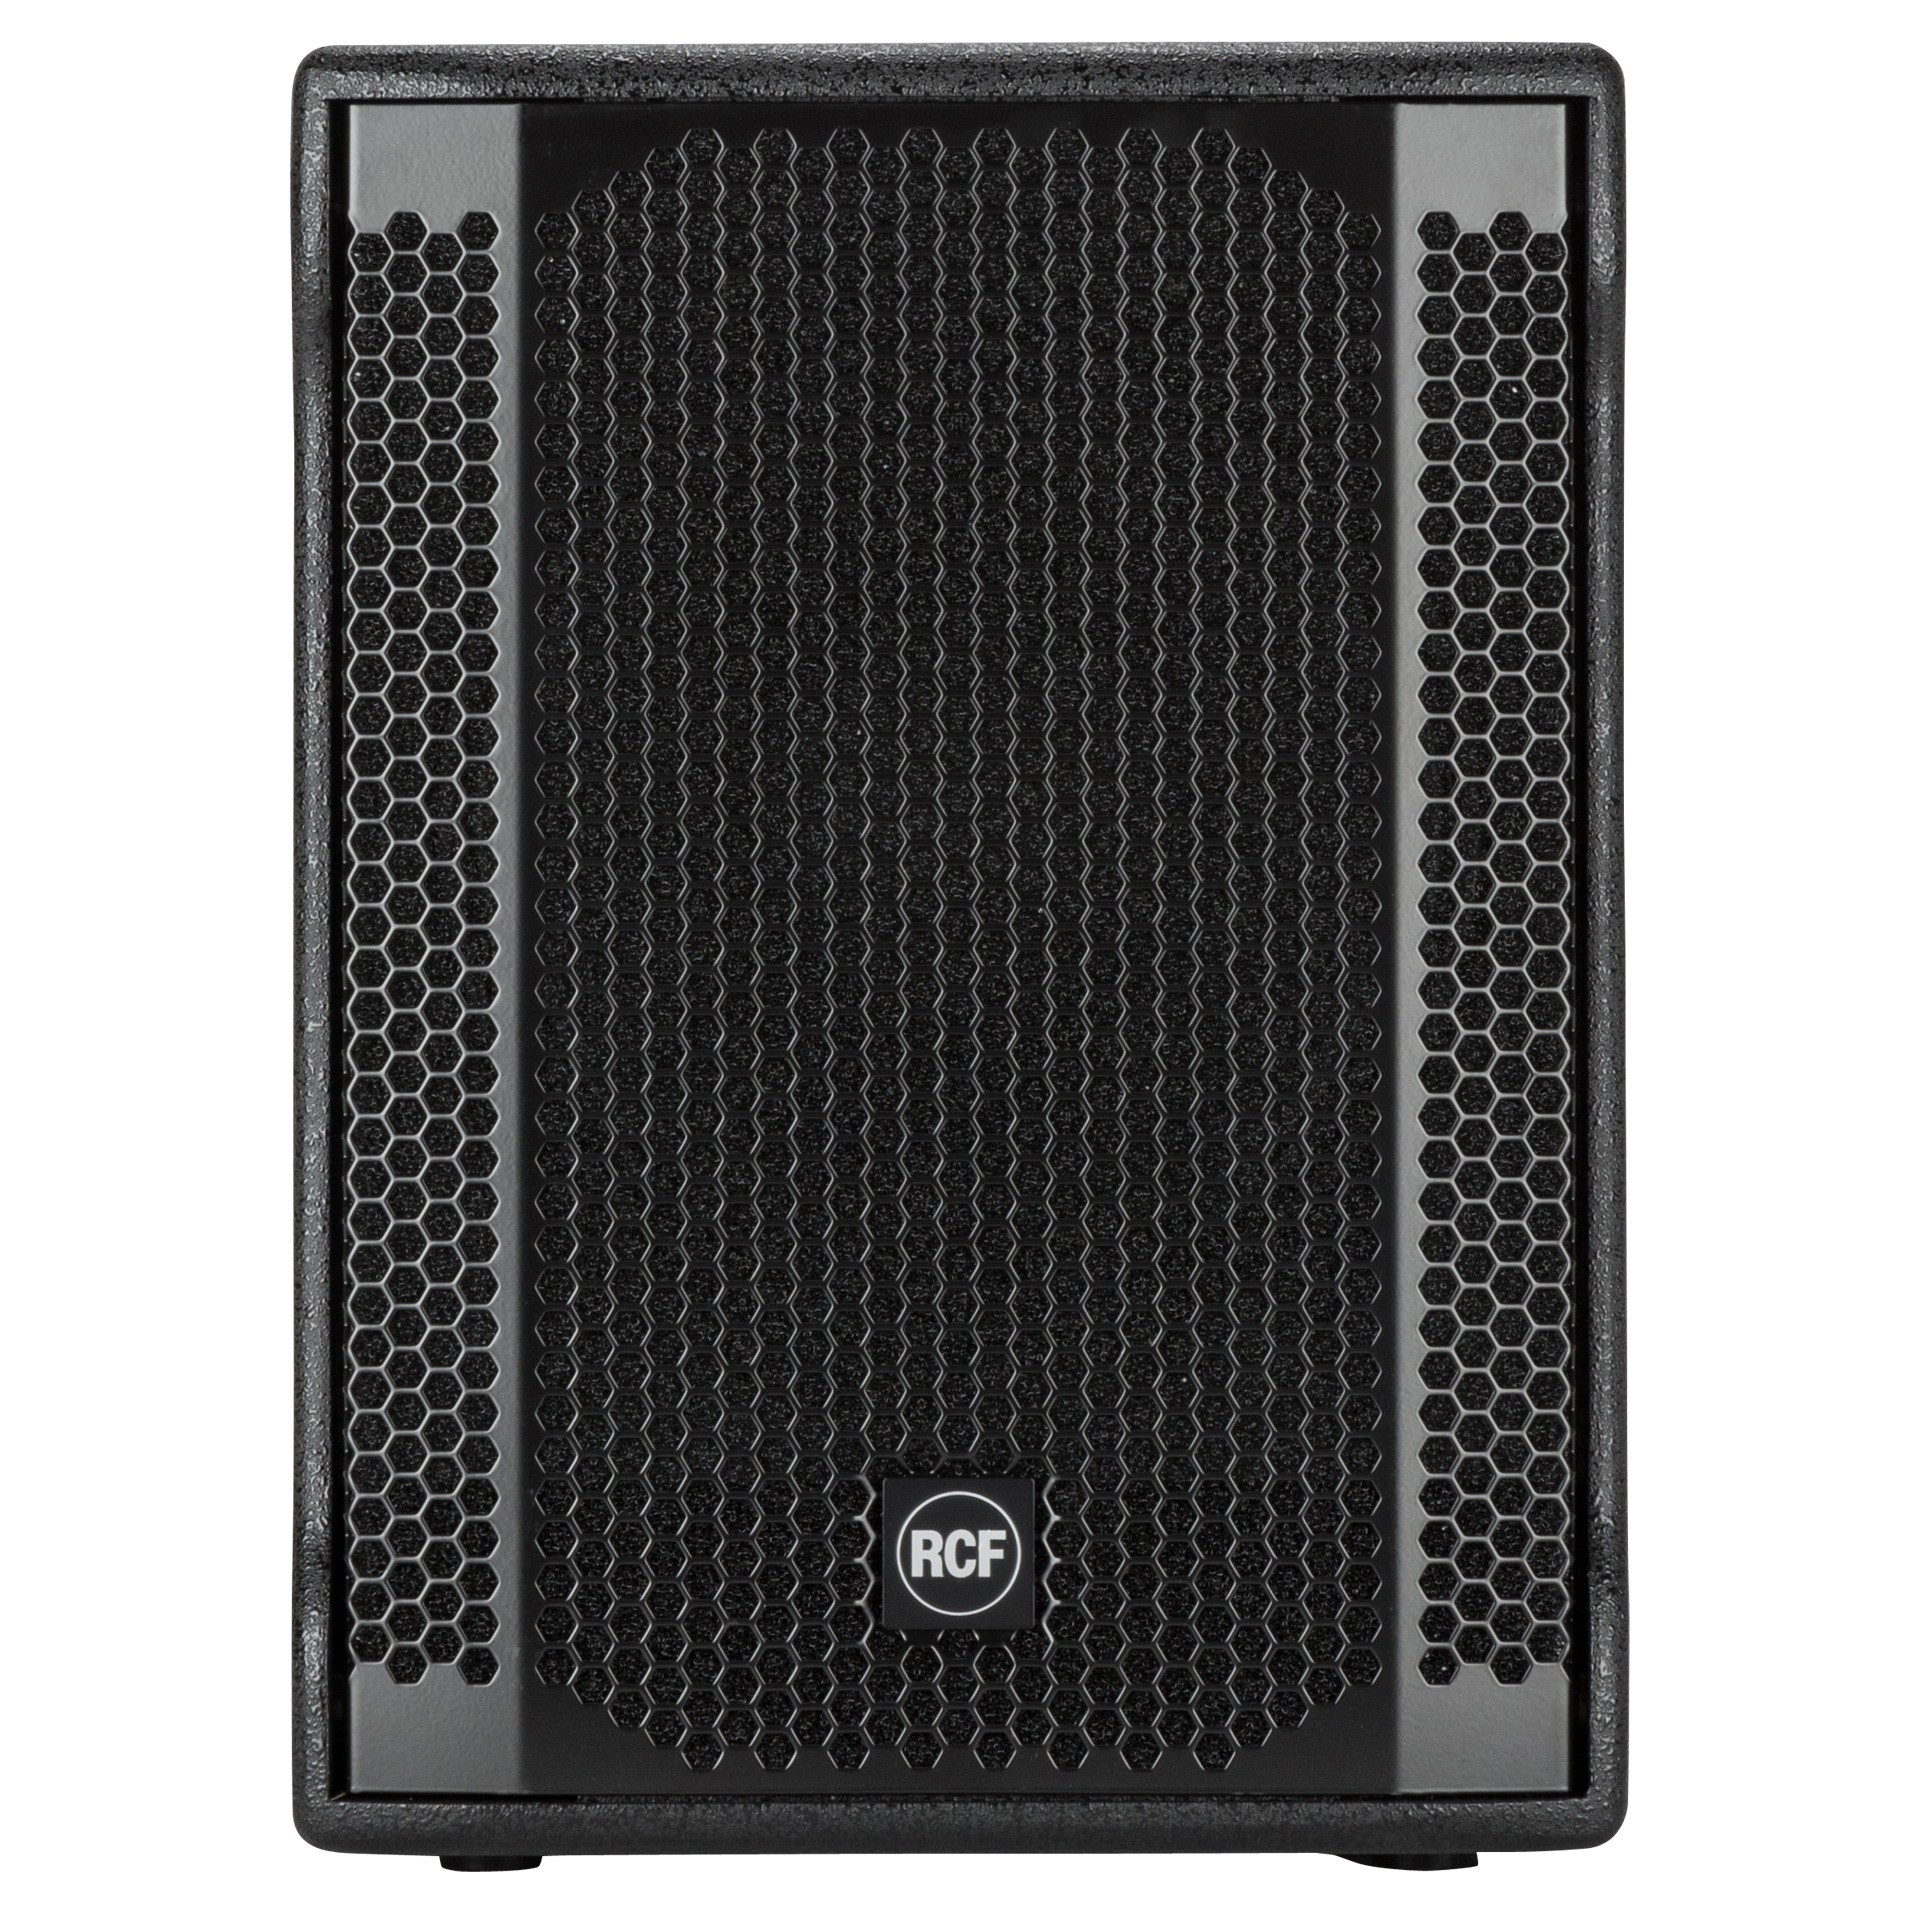 Subwoofere pro - Subwoofer activ RCF SUB 702-AS II, audioclub.ro